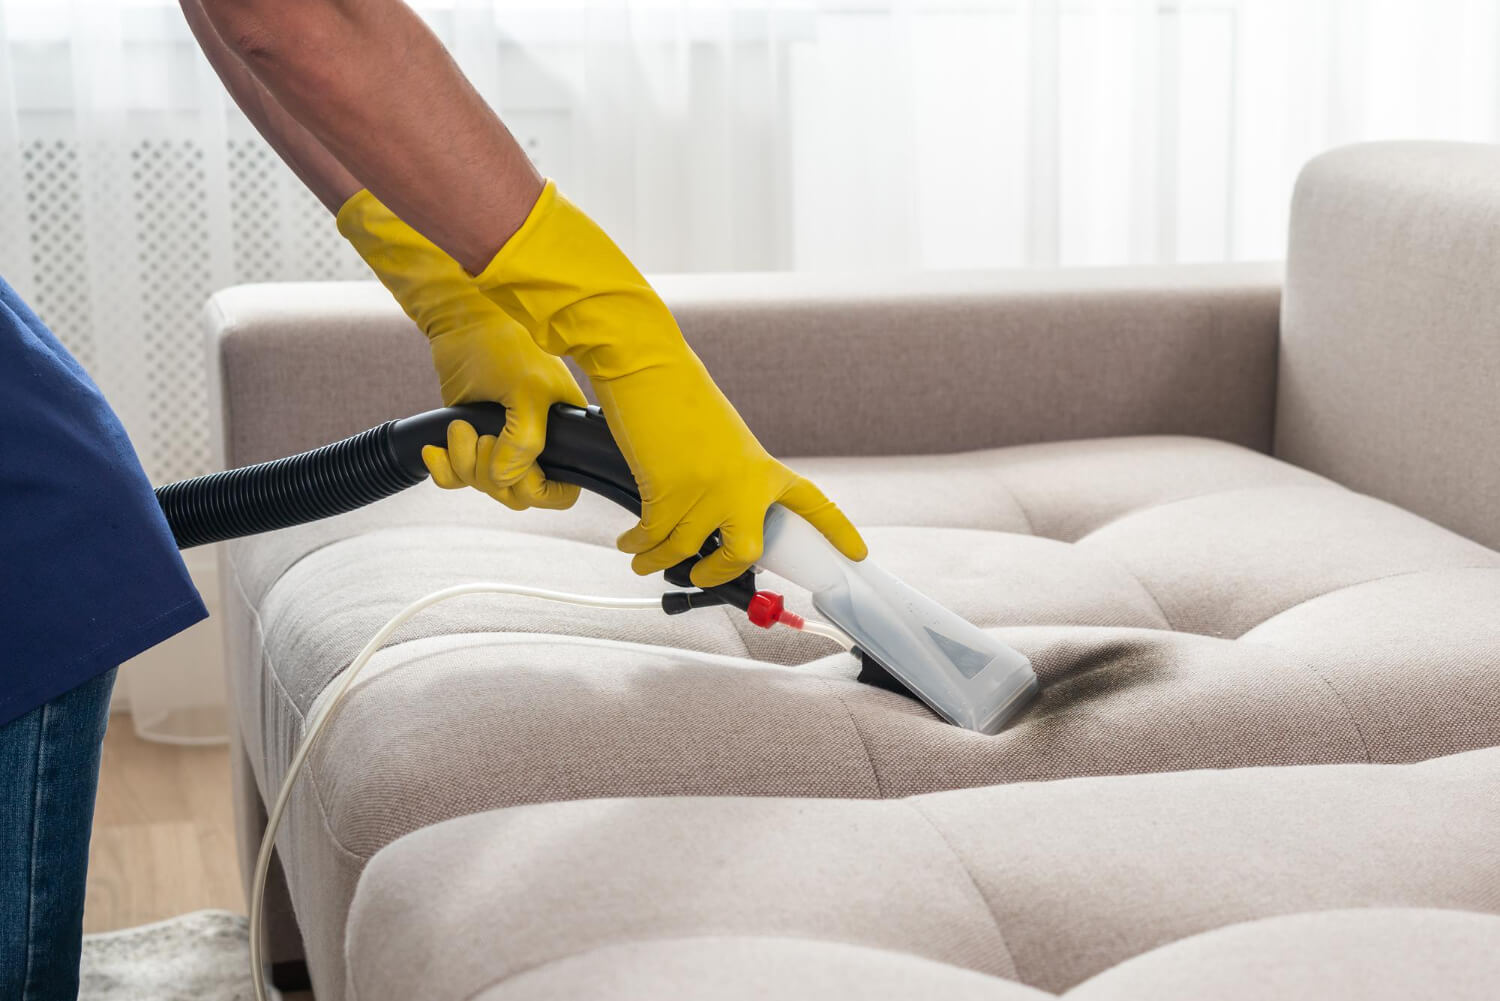 close up cleaners hands in yellow protective gloves holding professional vacuum cleaner while cleaning grey sofa